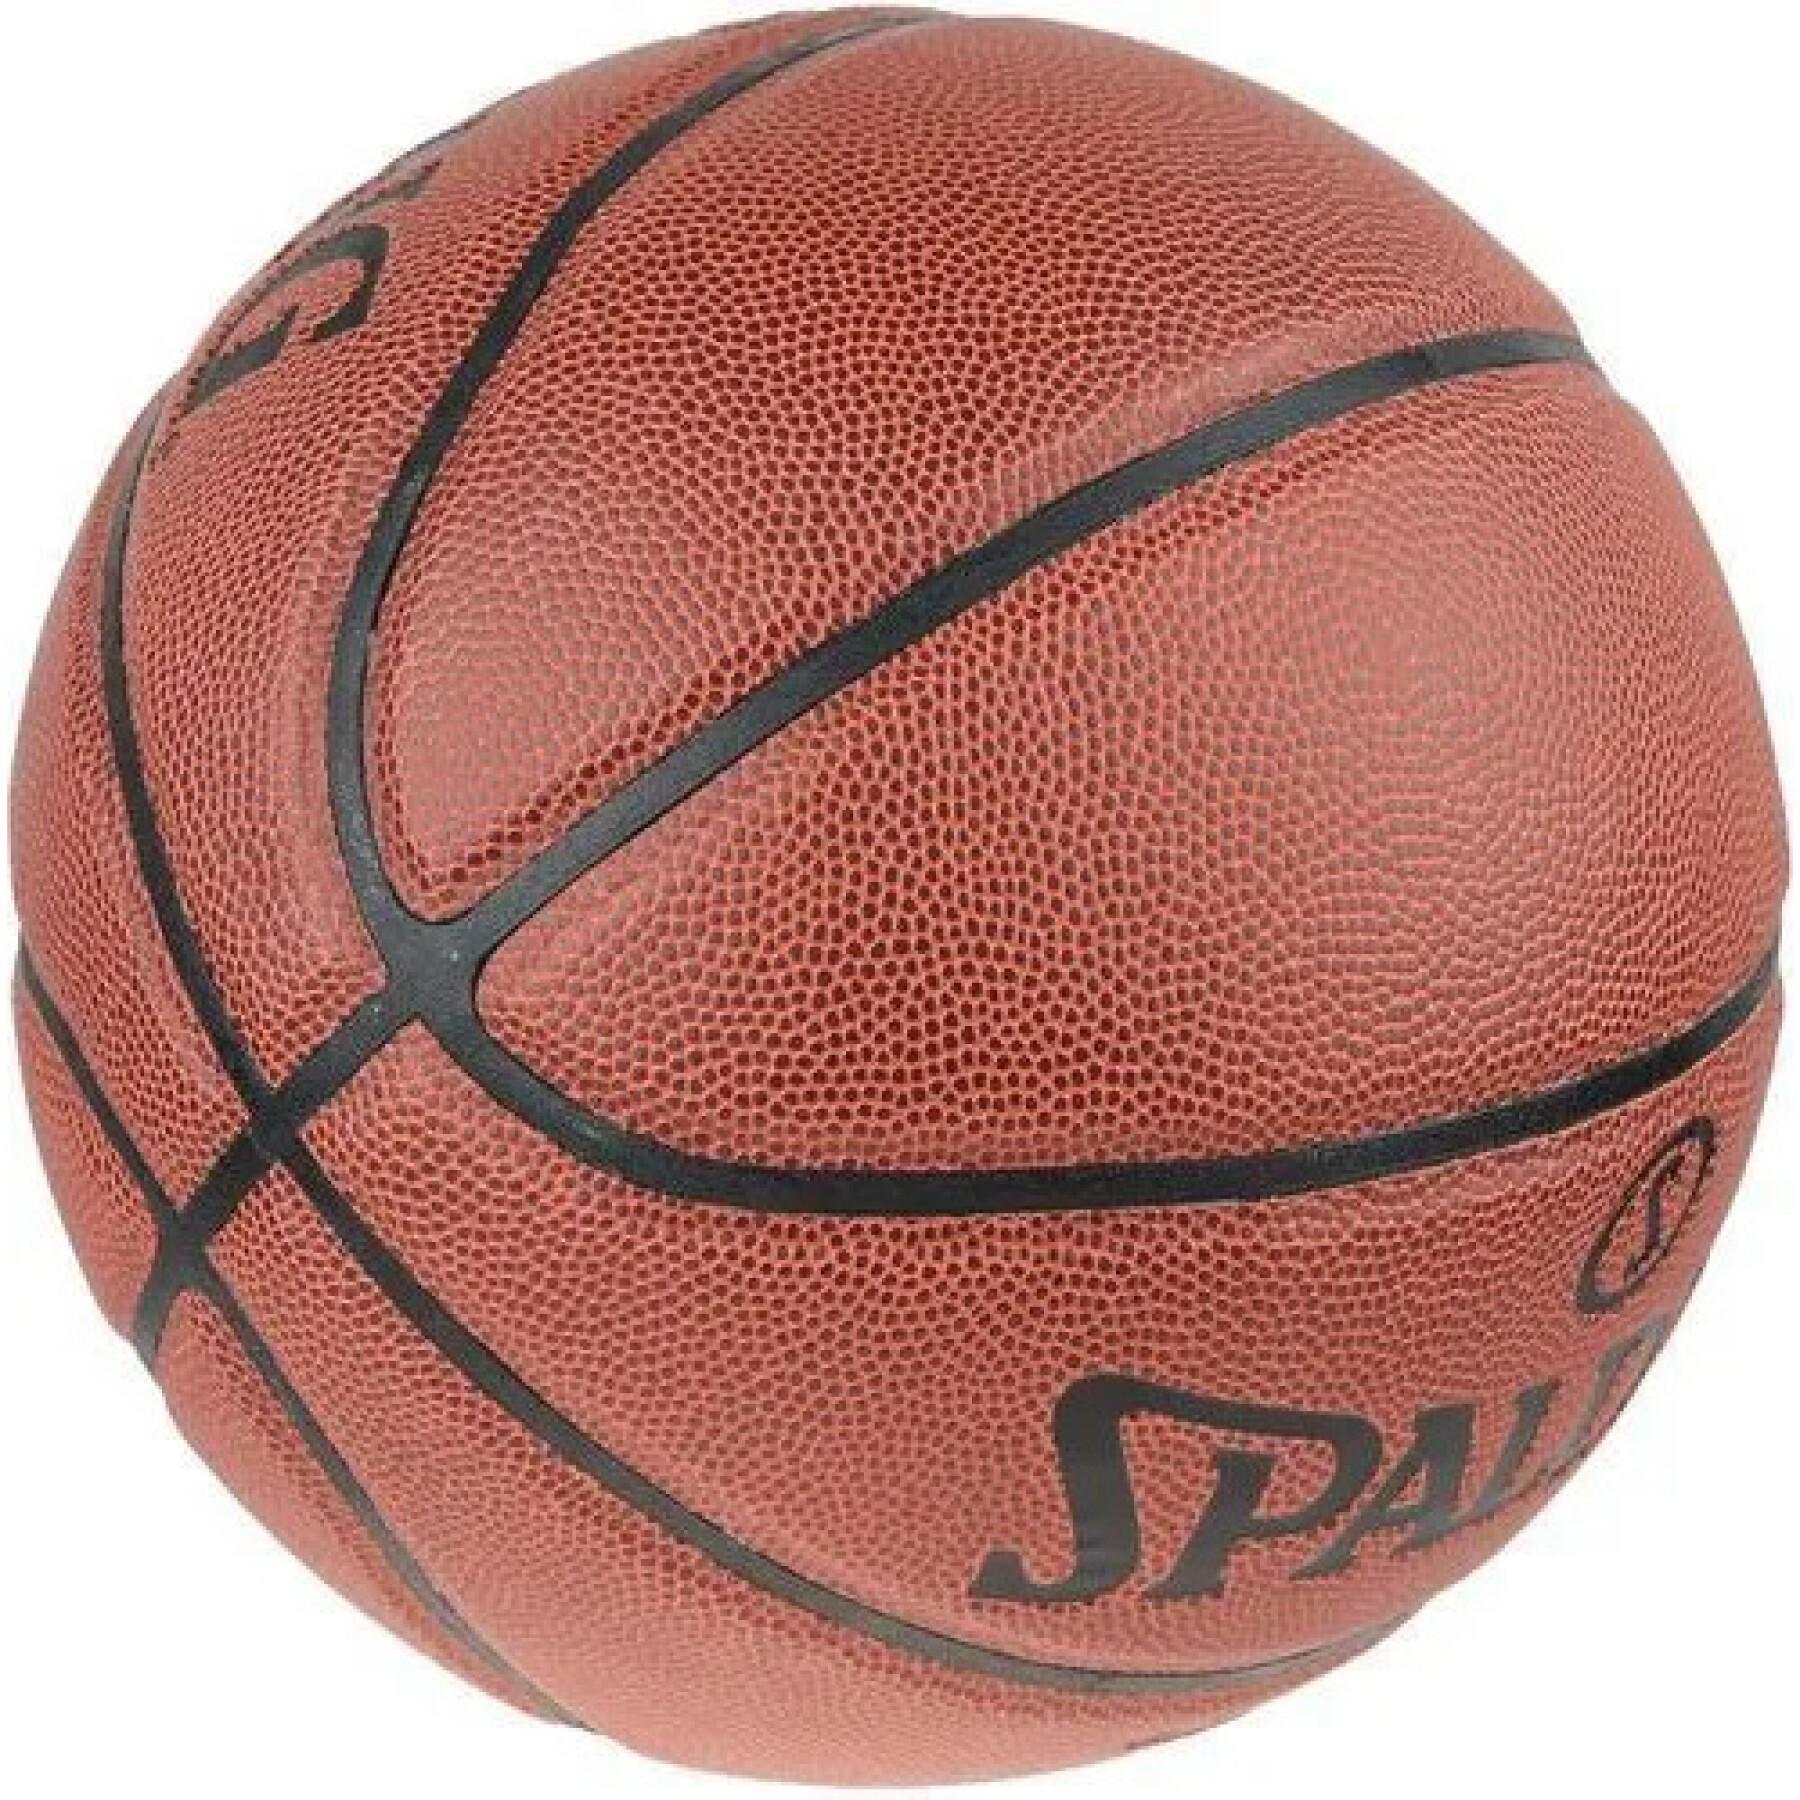 Palloncino Spalding NBA Grip Control in/out orange